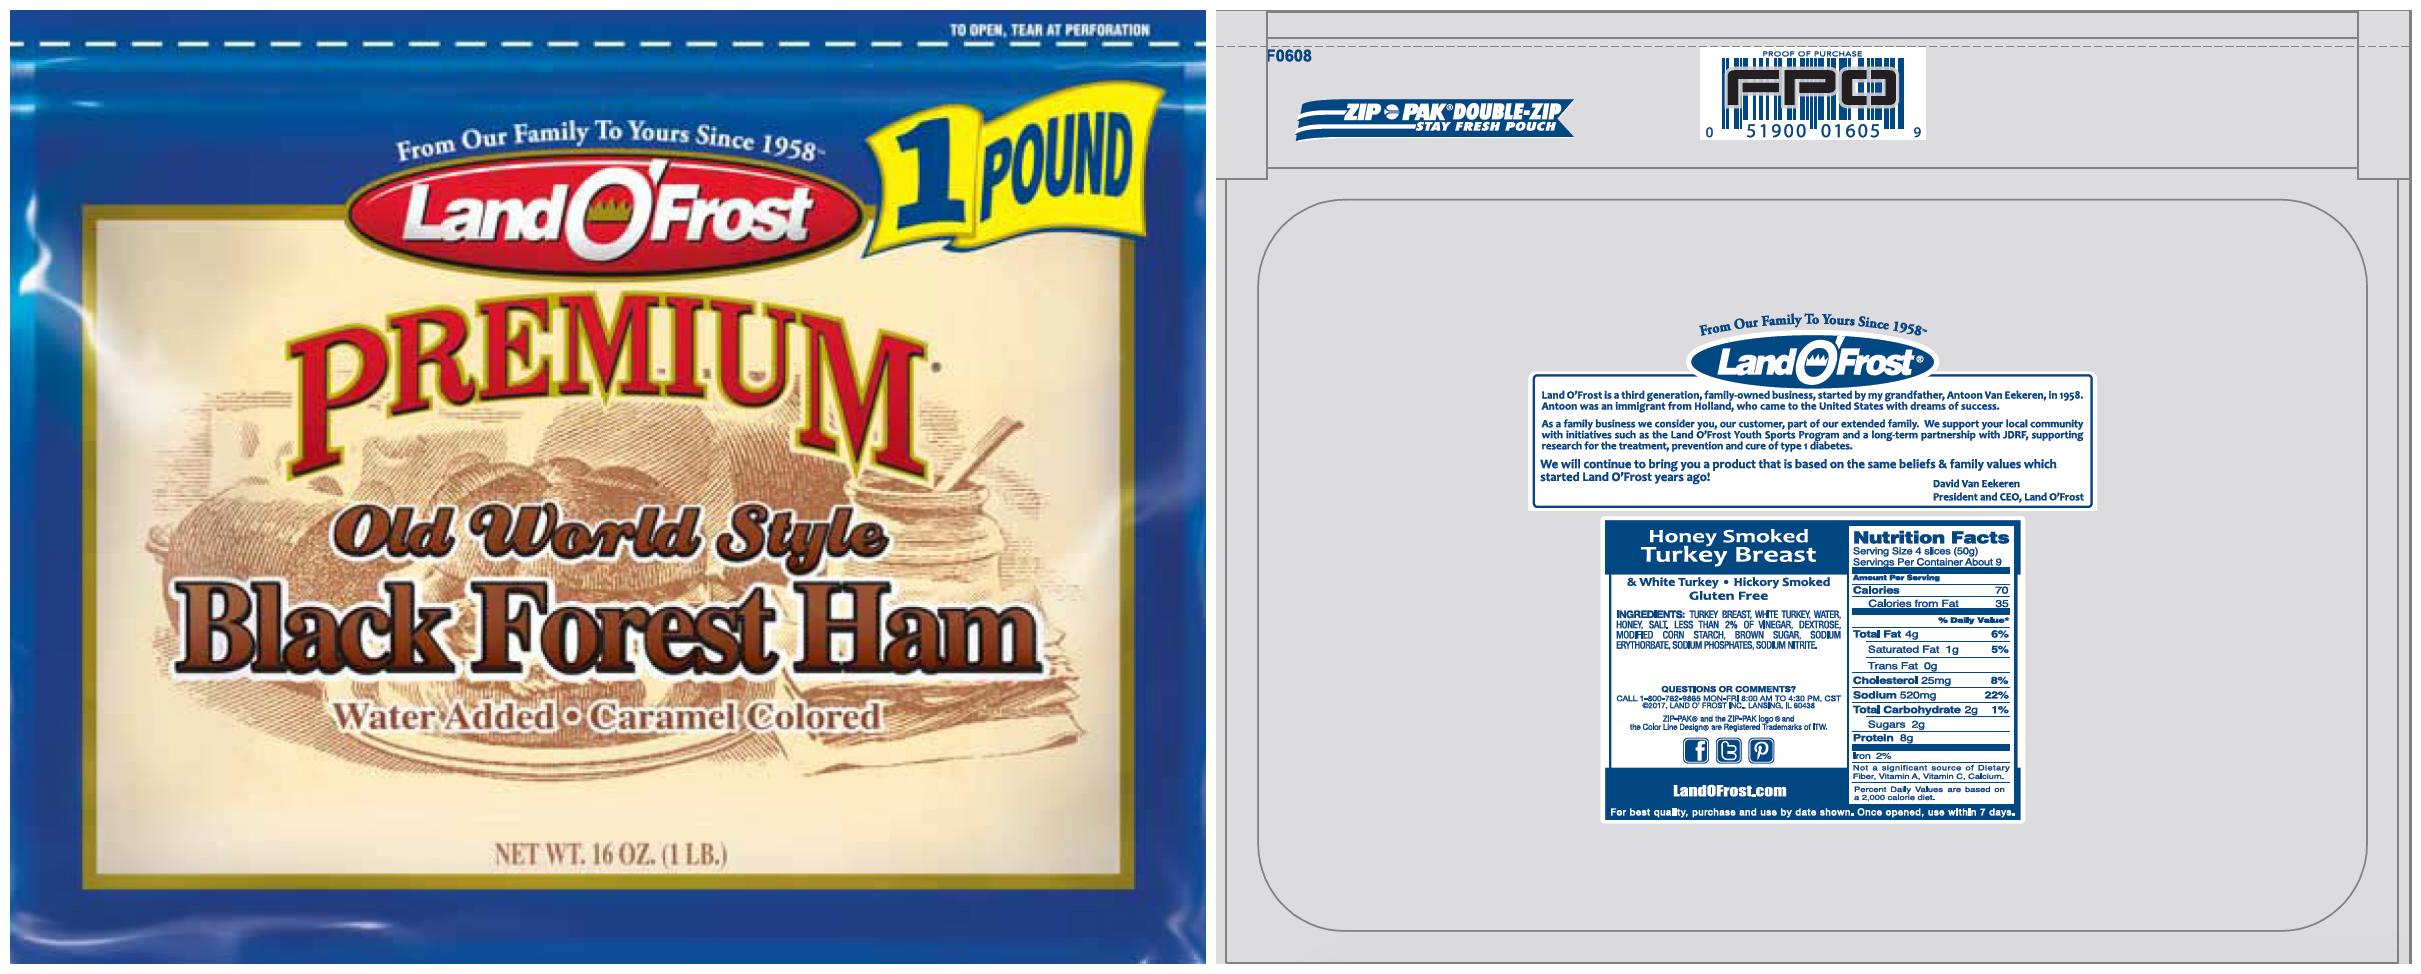 Land O'Frost Recalls Almost 5,000 Pounds of Ham Due to Improper Package